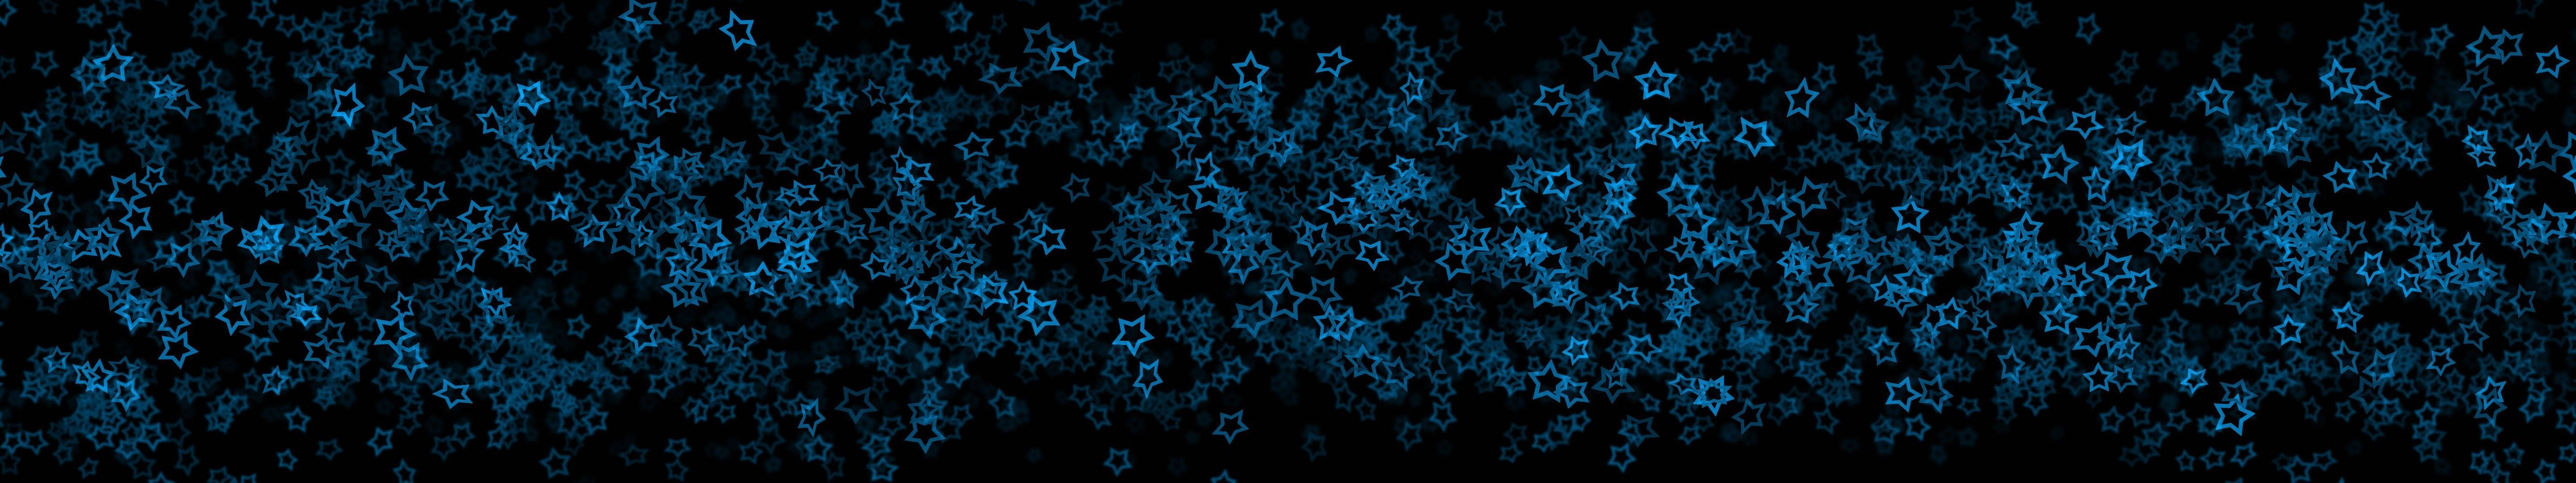 A Dark and Blue Starry Night Abstract Wallpaper